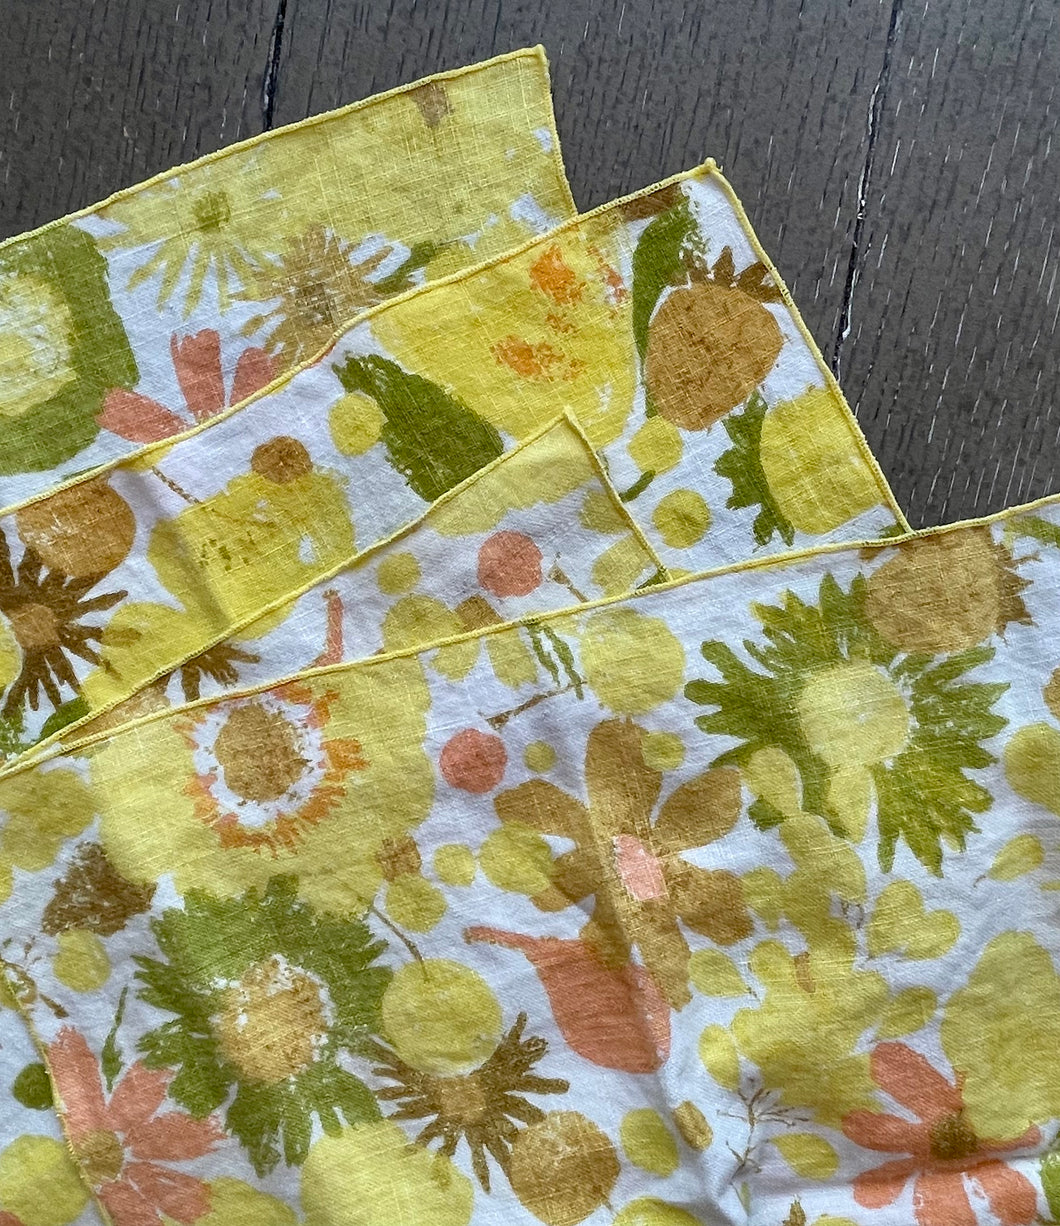 1960's Linen Napkin Set in Yellow Mod Floral